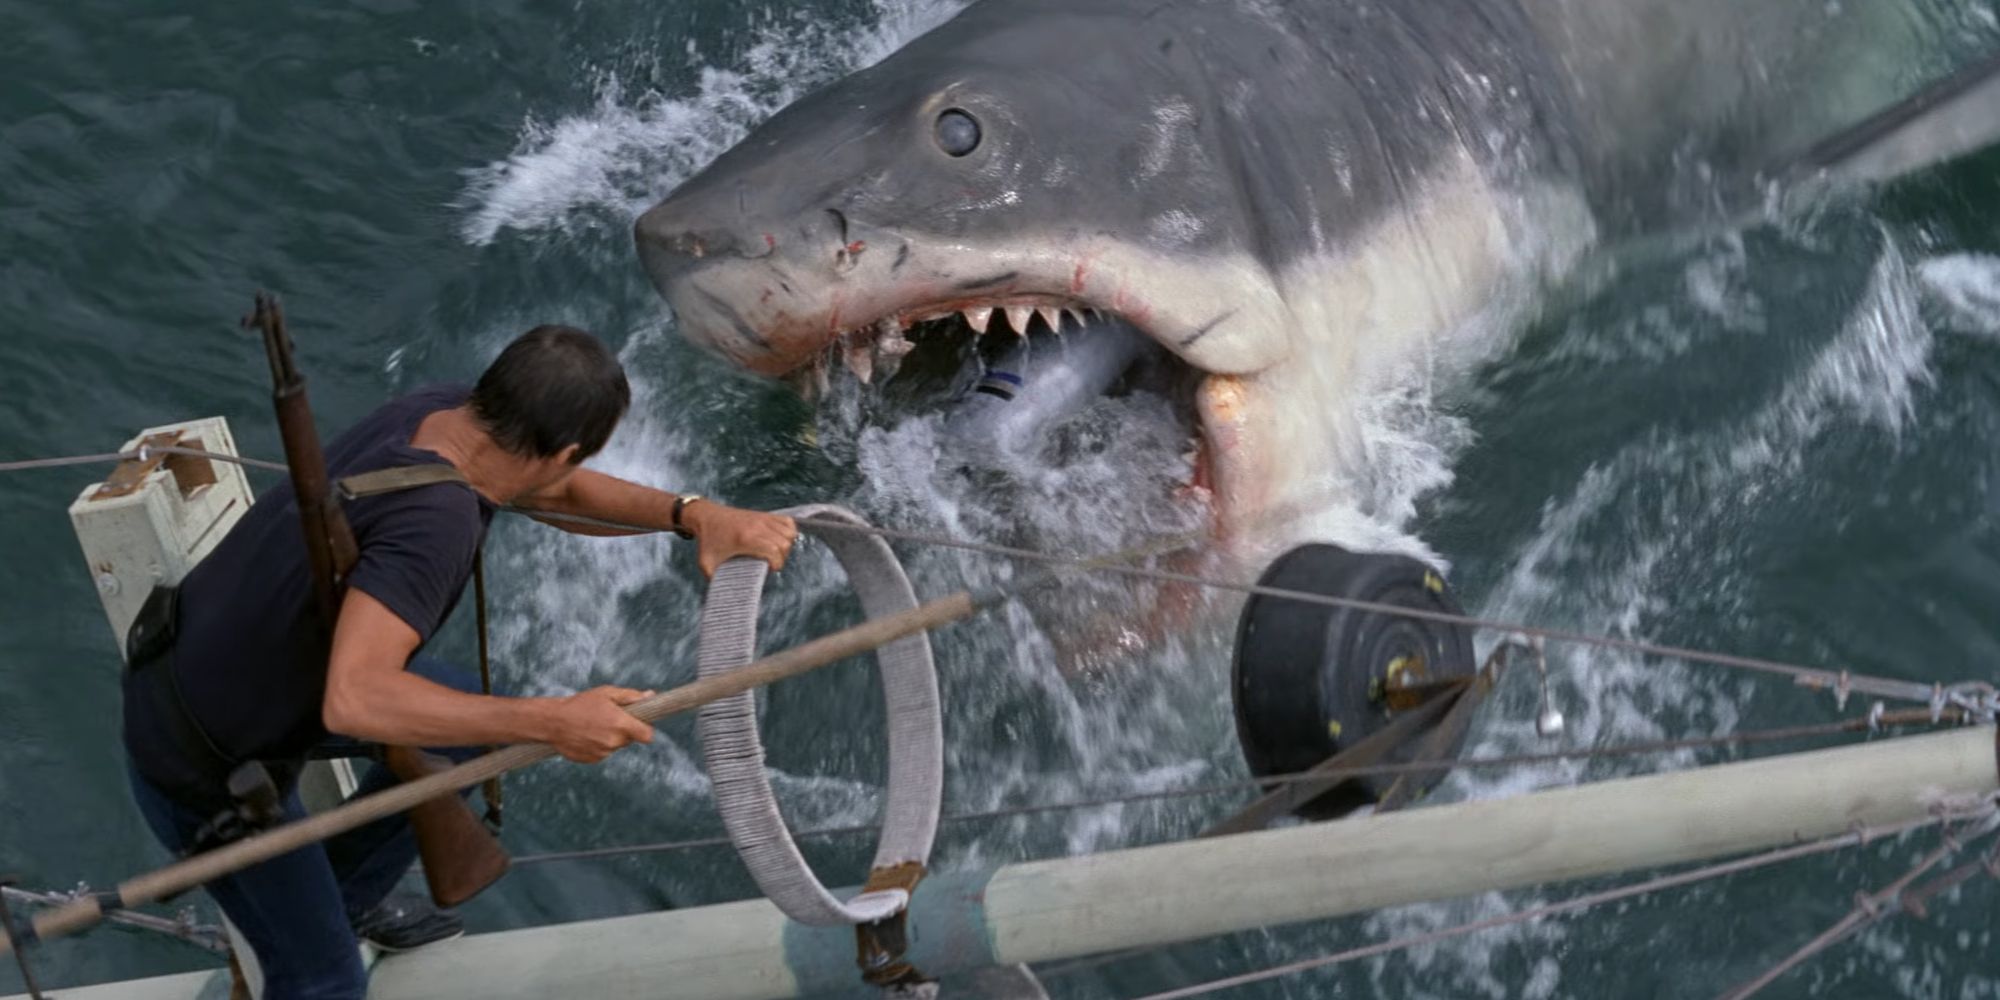 Martin Brody facing off with Bruce The Shark in Jaws